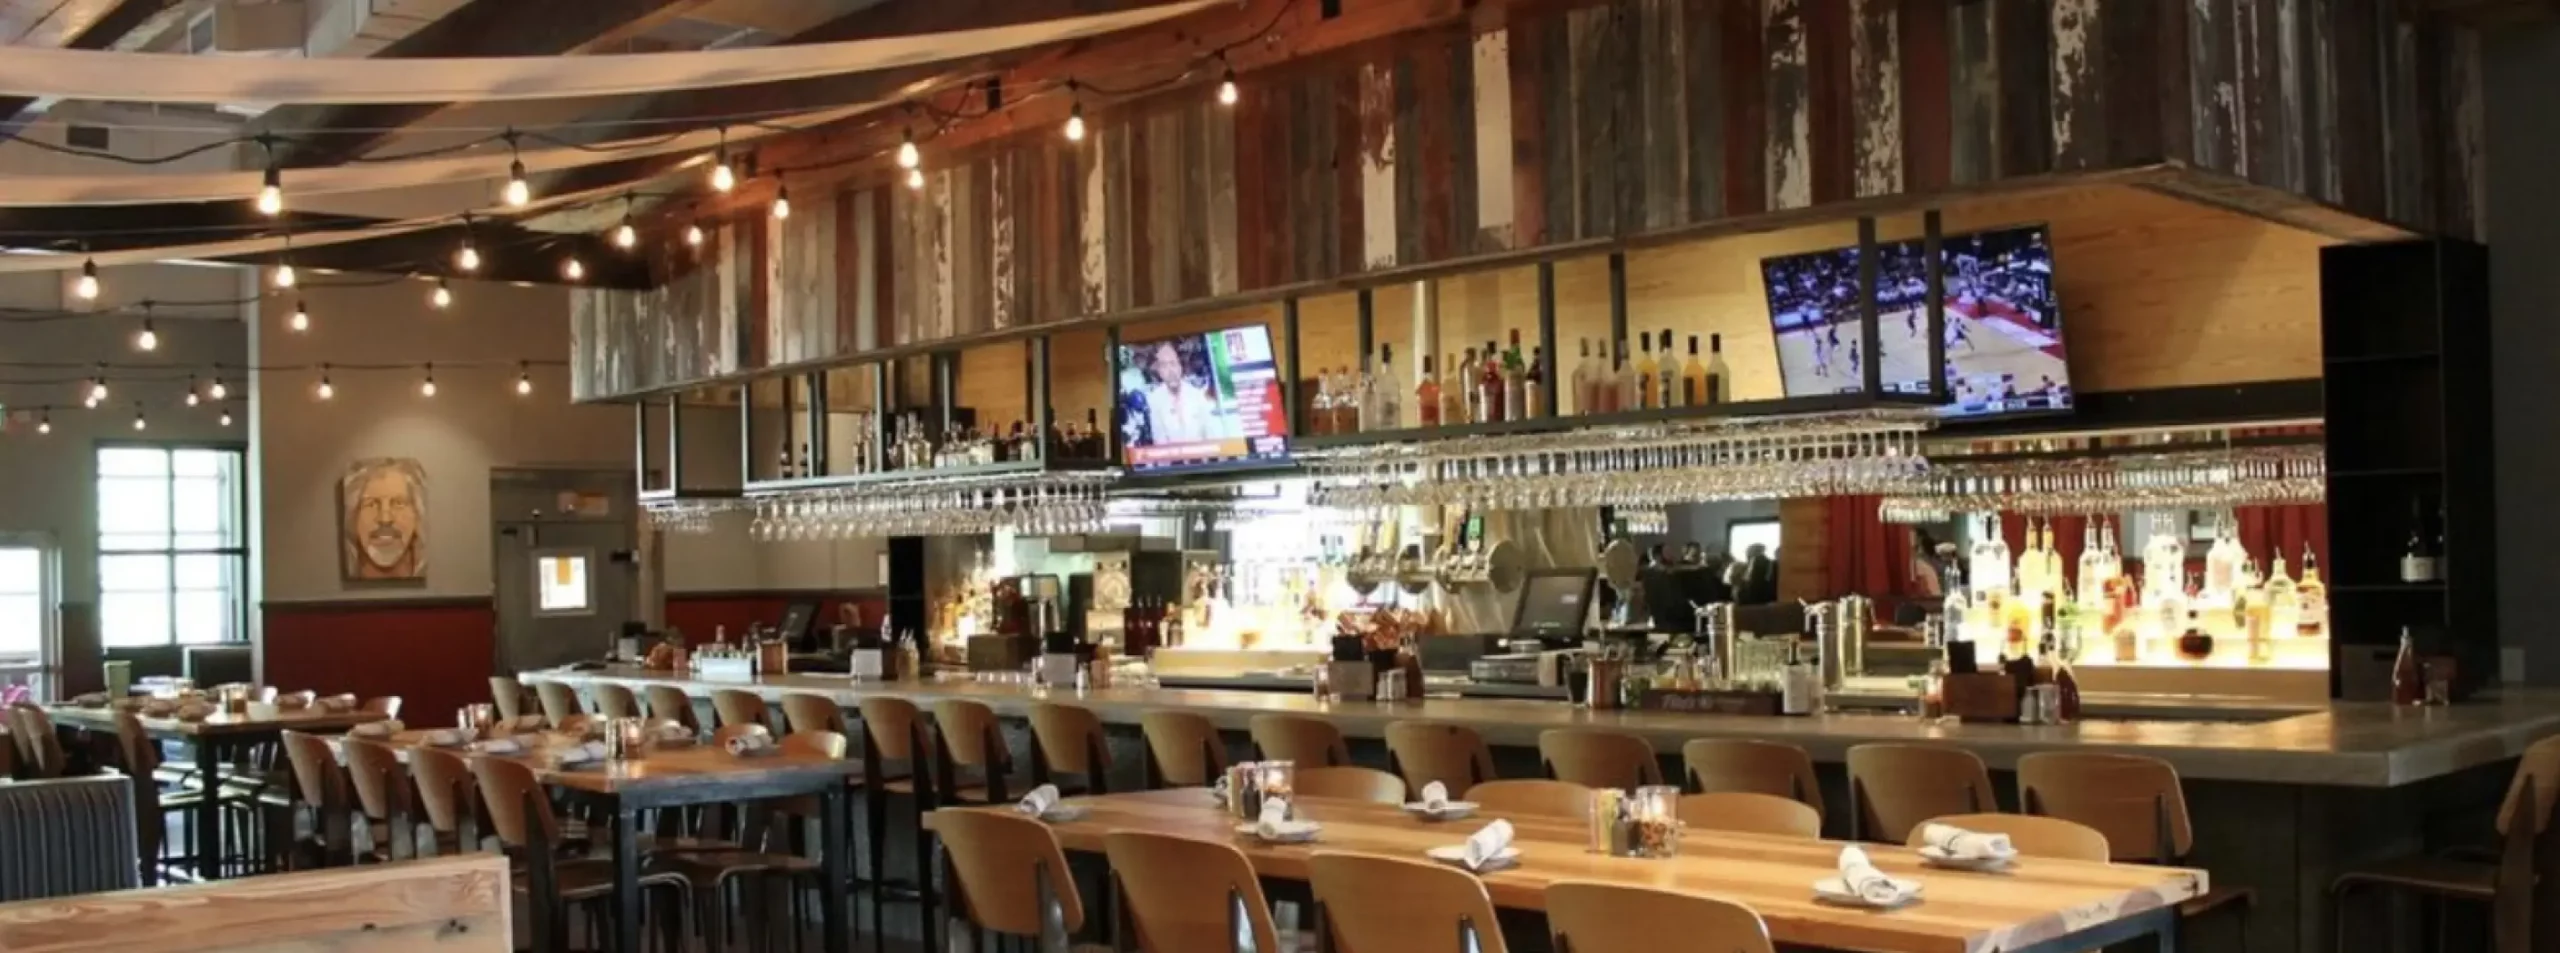 Jack Allen's Kitchen Bar View with Dining Tables and 2 TVs